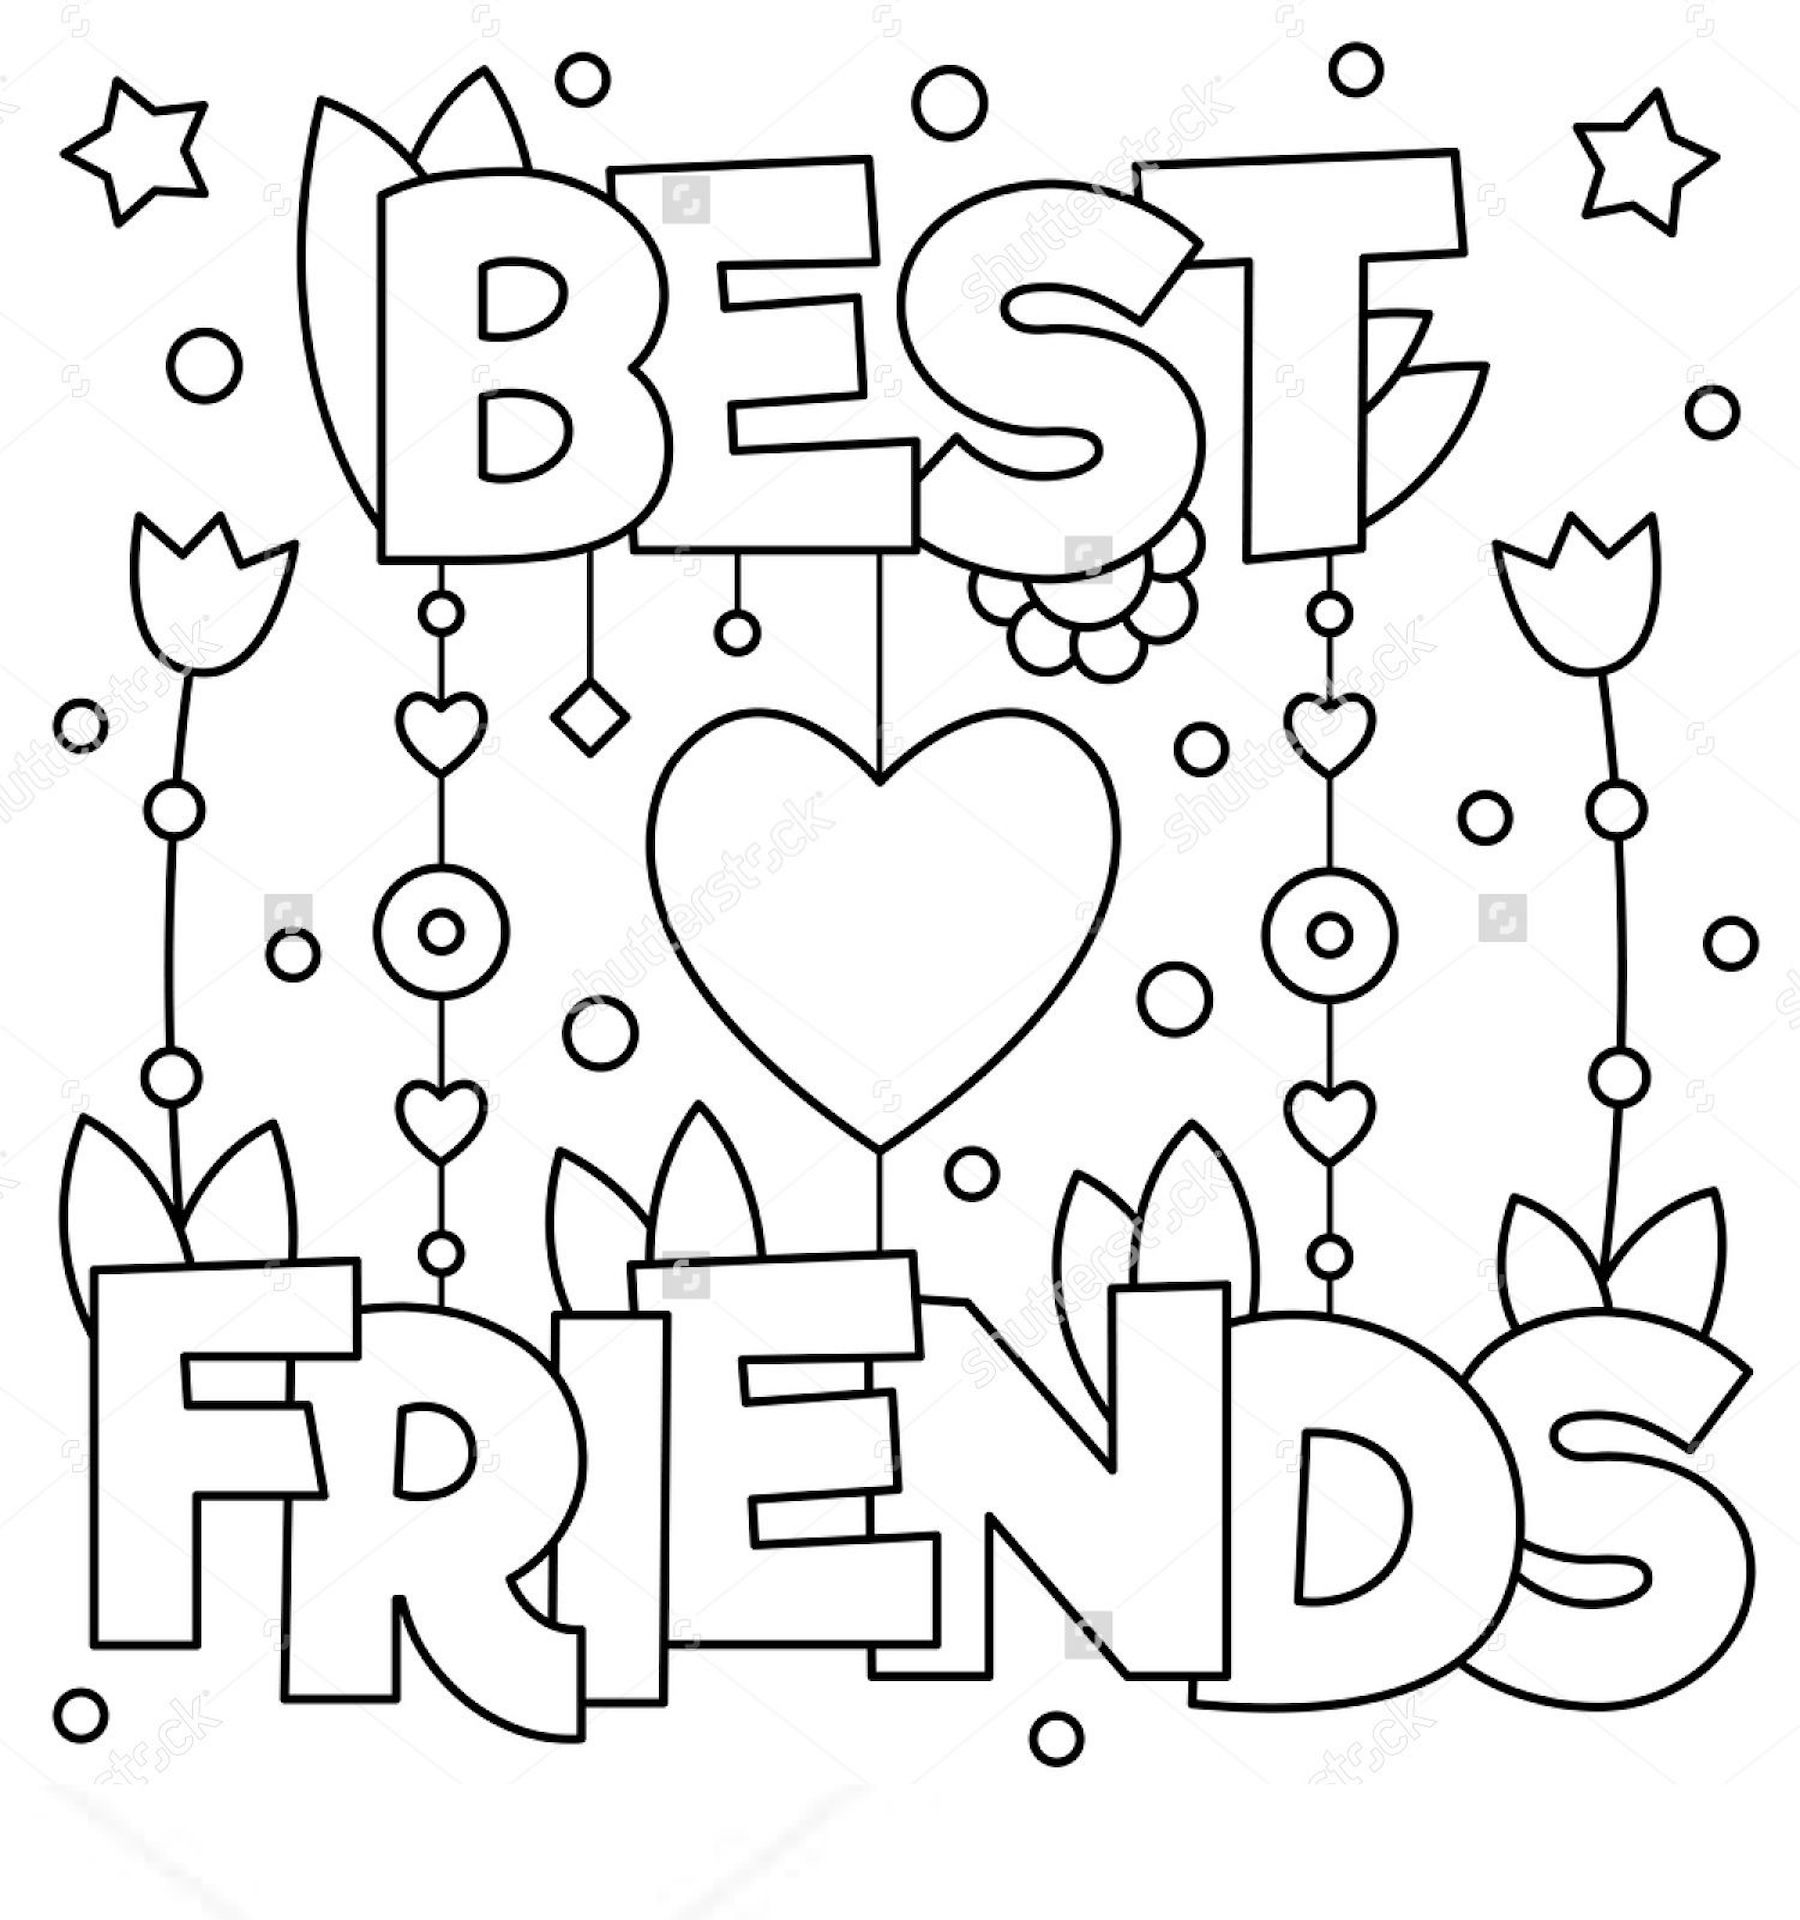 Best Friend Coloring Pages And Other Top 10 Themed Coloring Challenges